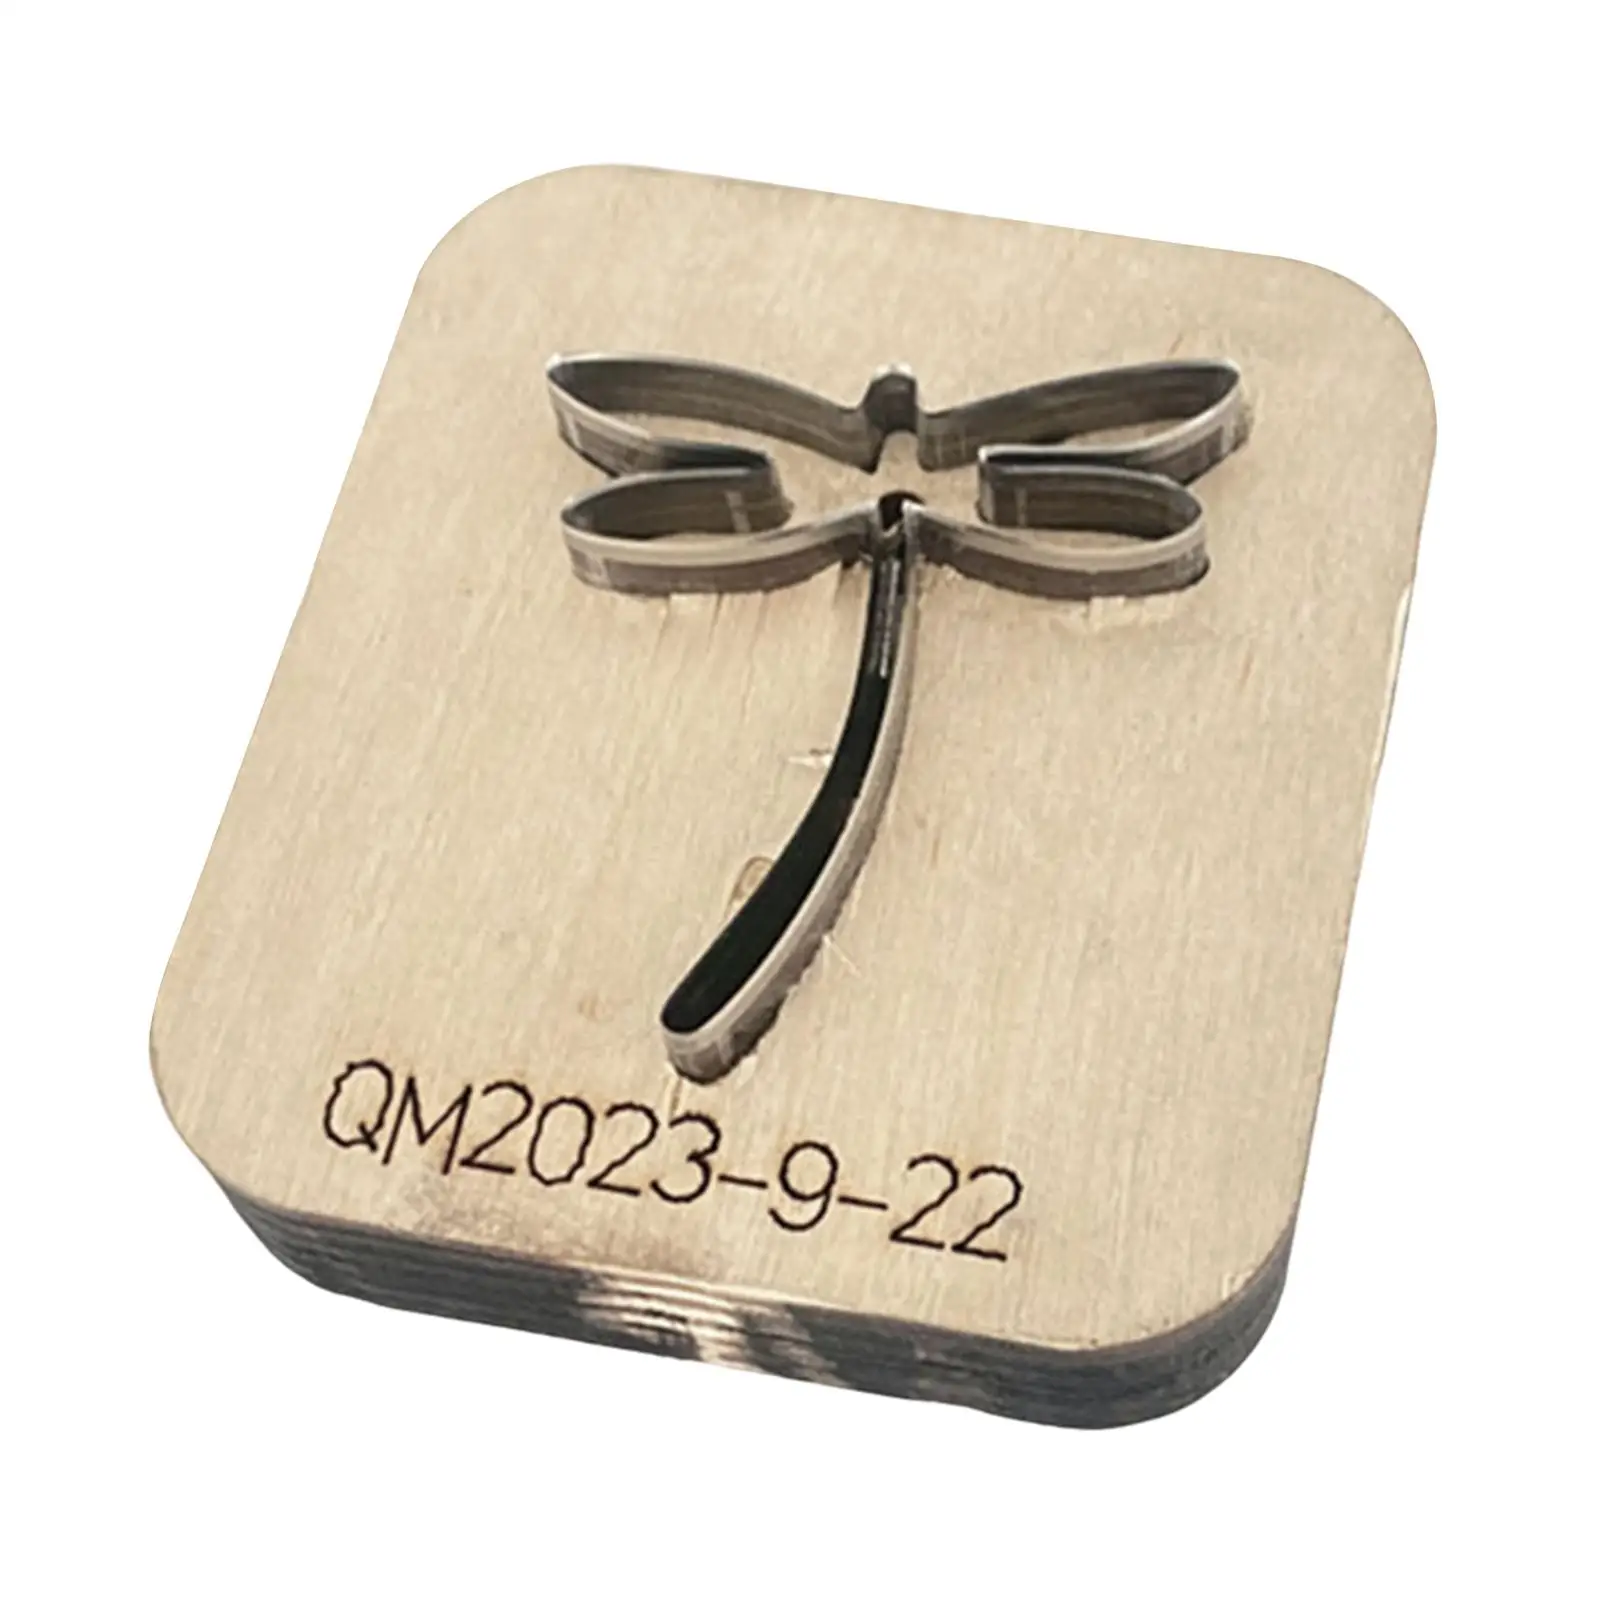 Leather Cutting Die Dragonfly Multipurpose Embossing Wooden Cutting Die Sturdy Home Cutting Tool Leathercraft Punching Template